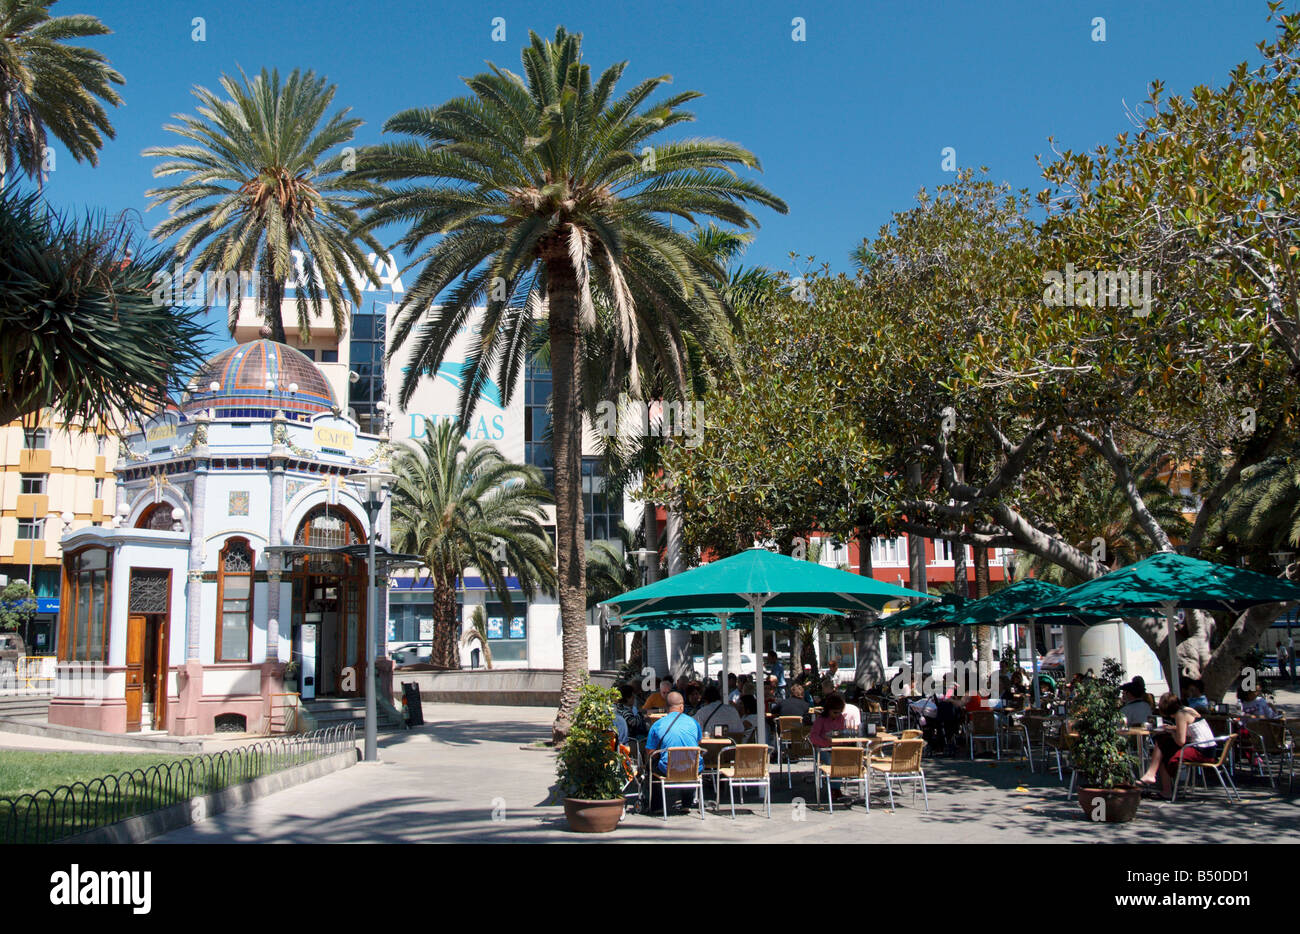 Cafe in Parque San telmo in Las Palmas on Gran Canaria in The Canary Islands. Stock Photo